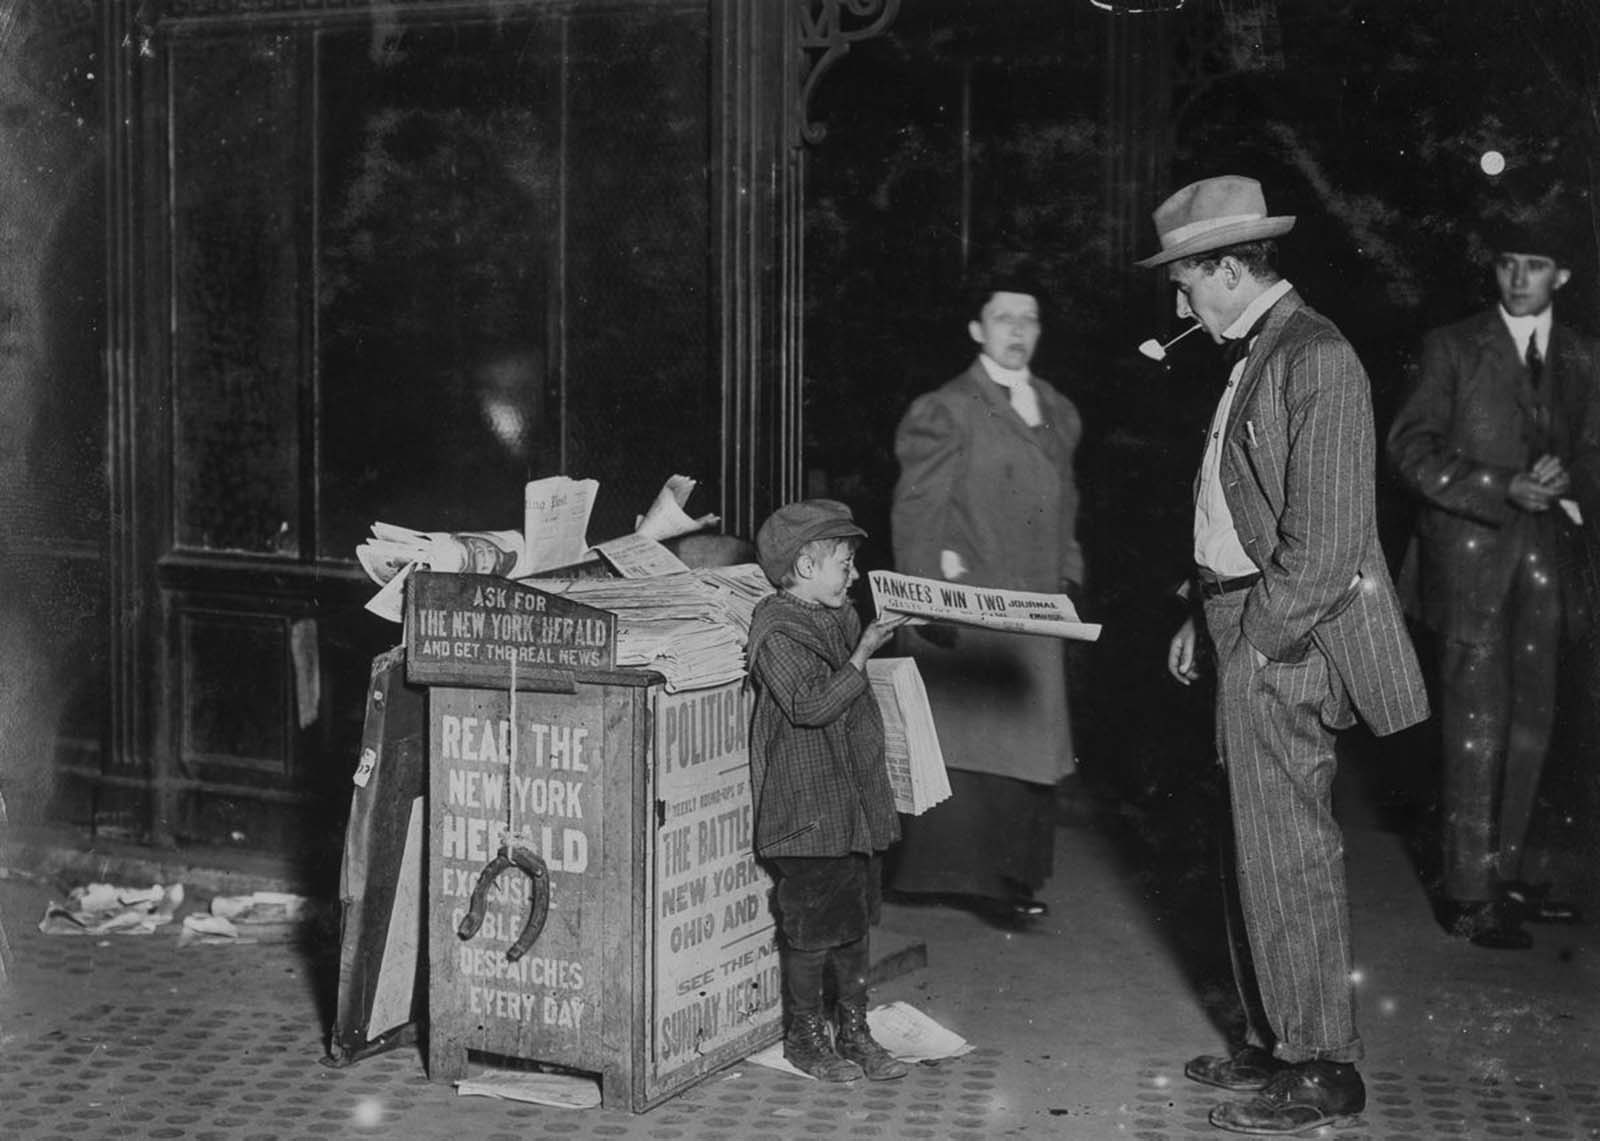 Jerald Schaitberger of 416 West 57th Street, who helps an older boy sell papers until 10 p.m. on Columbus Circle, 1910